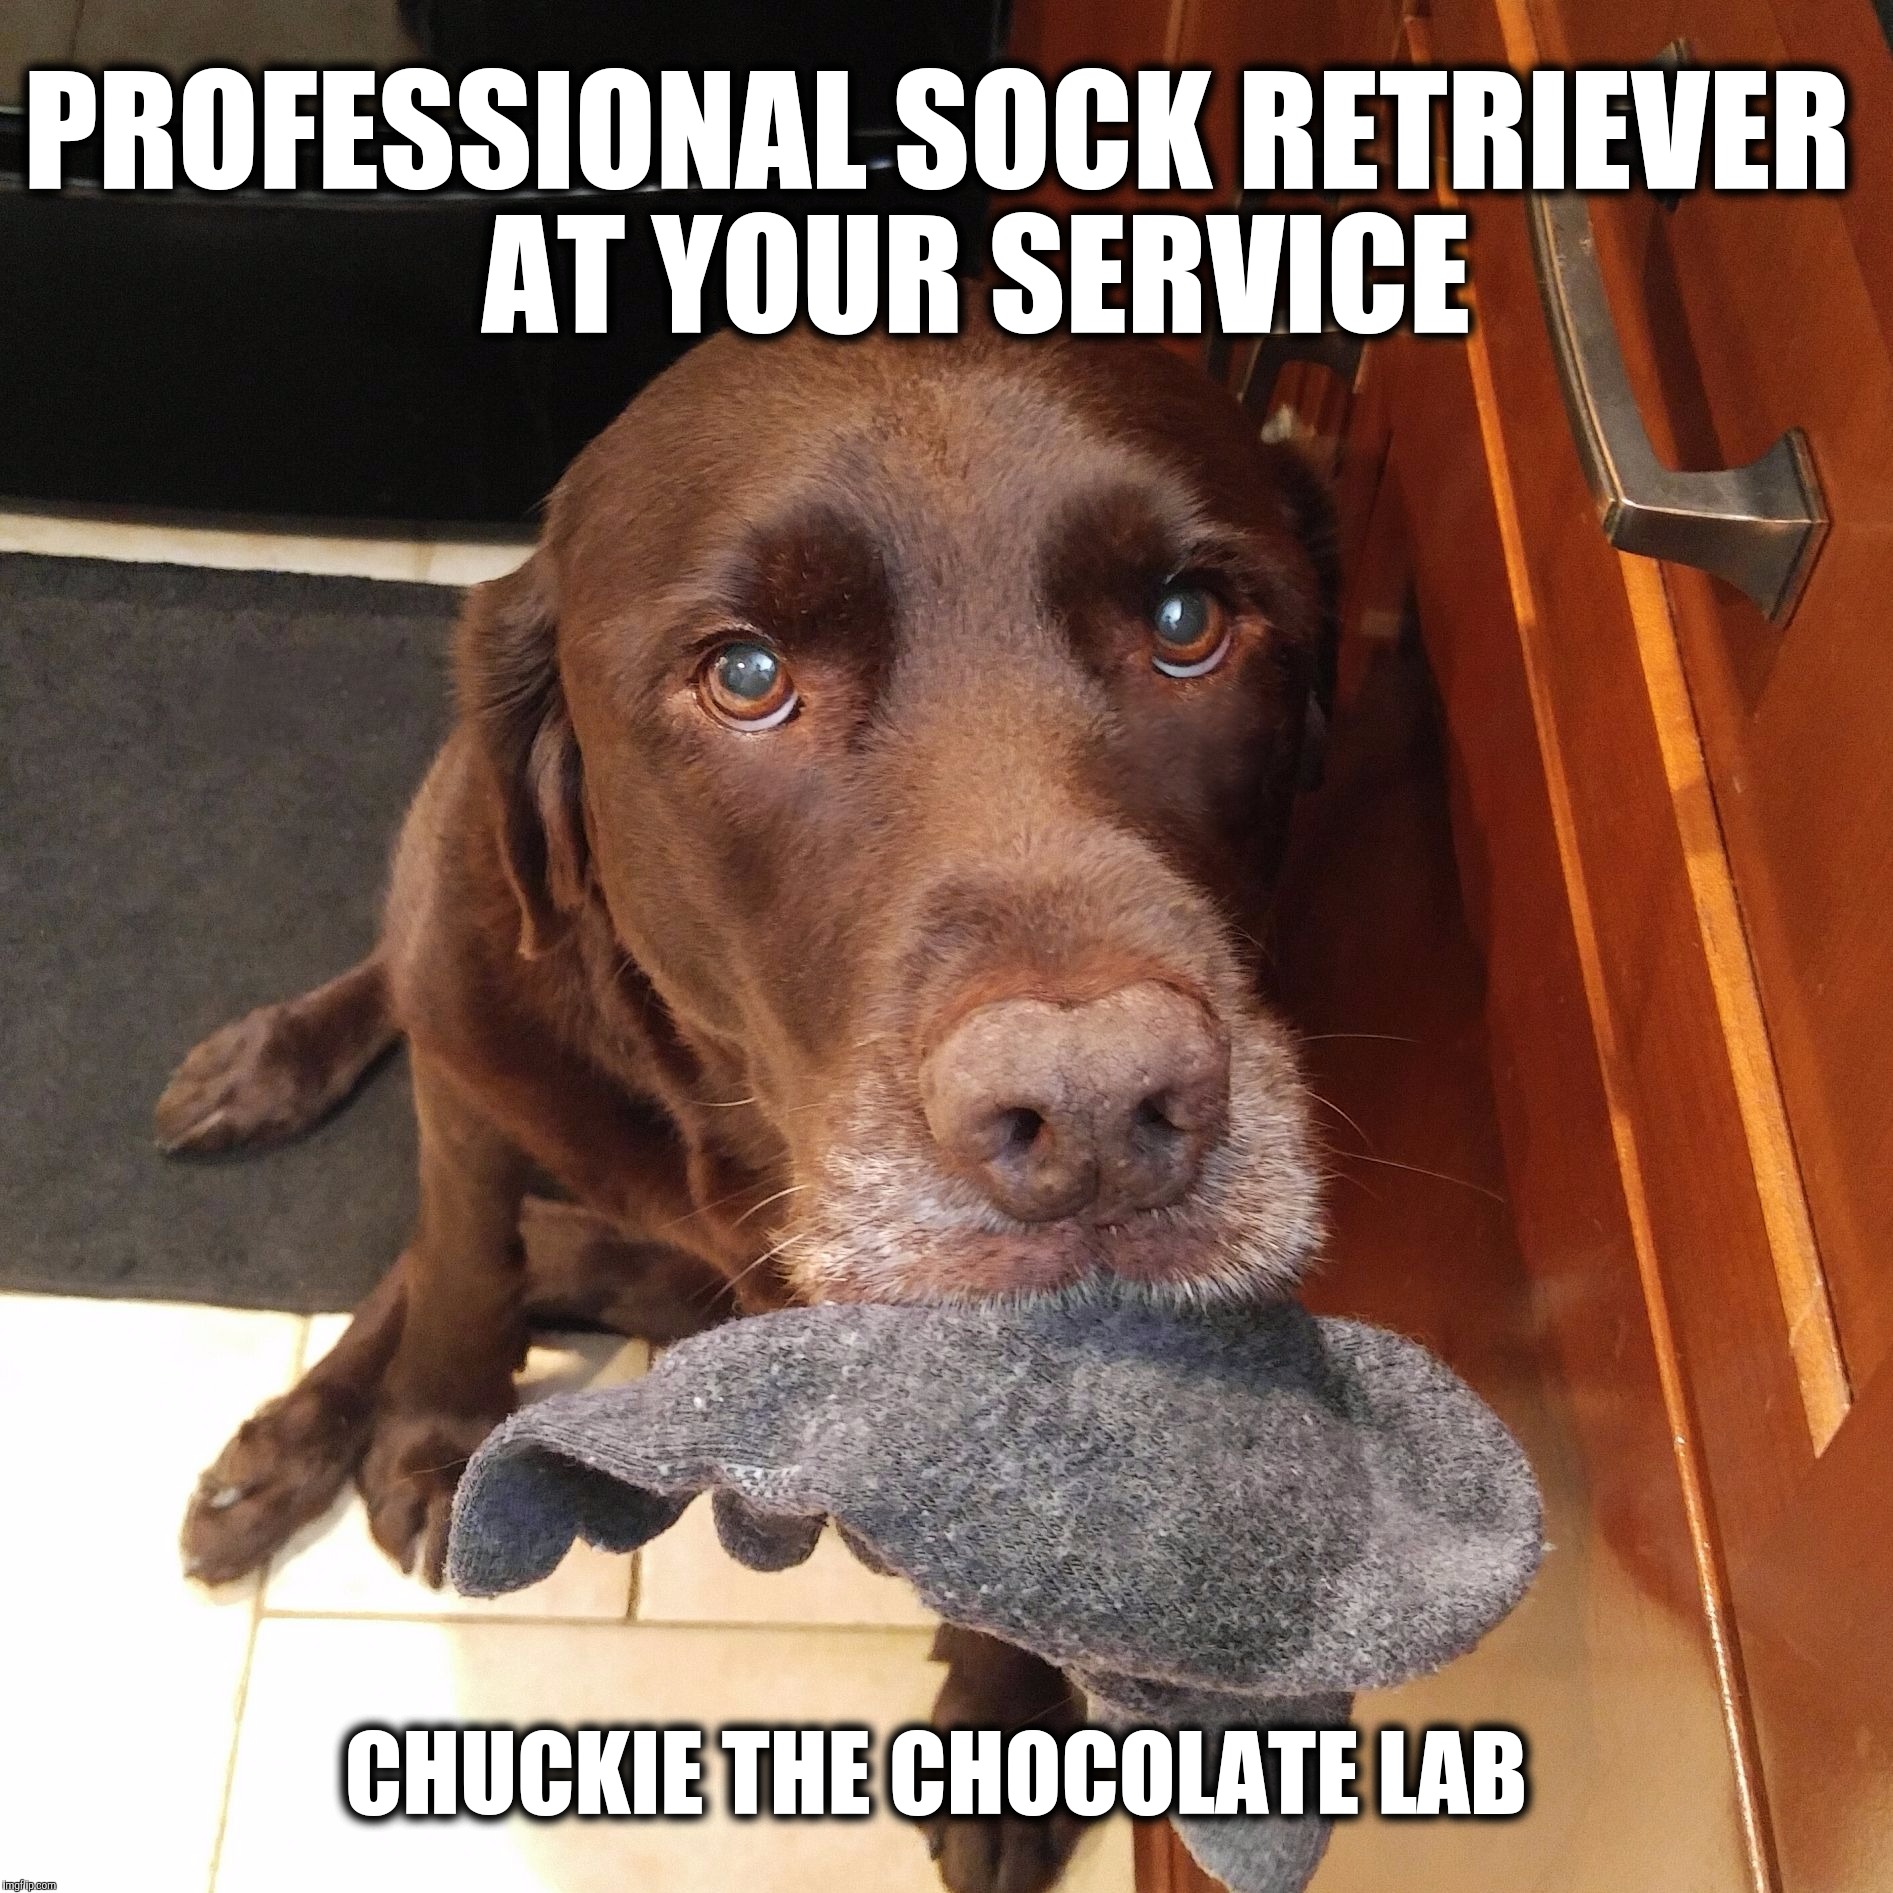 Professional Sock Retriever  |  PROFESSIONAL SOCK RETRIEVER    
AT YOUR SERVICE; CHUCKIE THE CHOCOLATE LAB | image tagged in chuckie the chocolate lab,sock,funny memes,dogs,retriever,funny dog memes | made w/ Imgflip meme maker